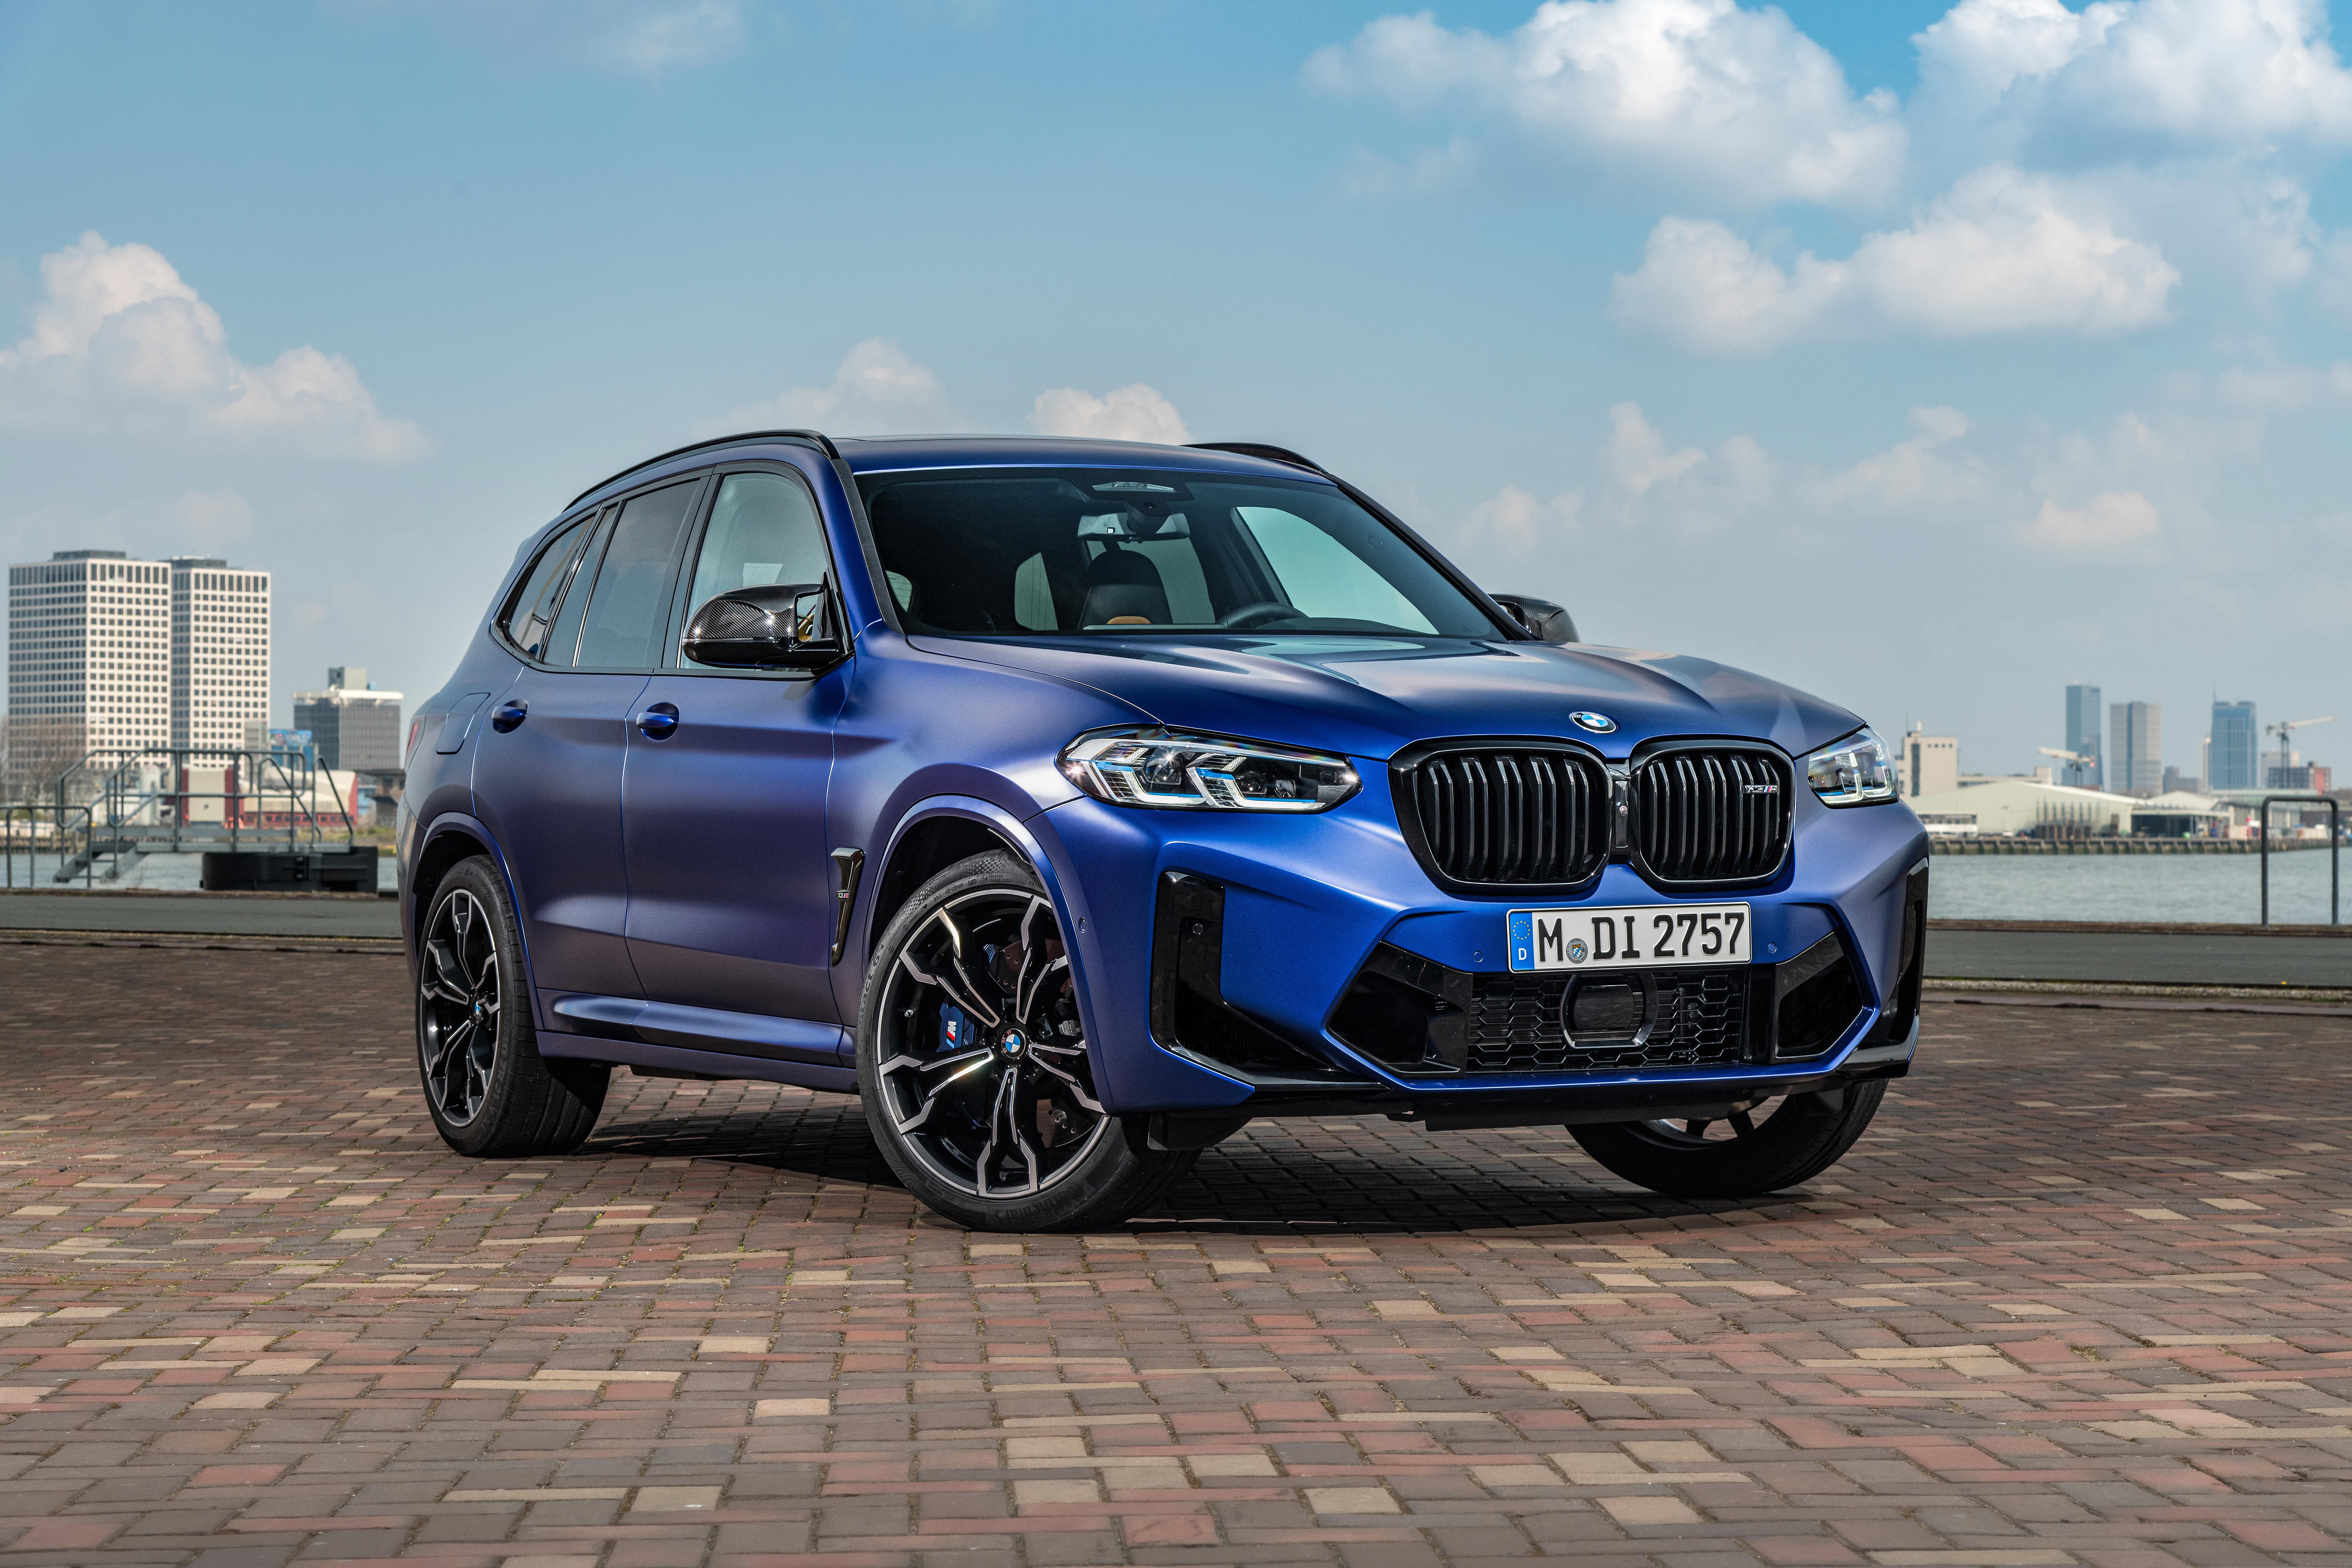 Gas Tank Size of the 2022 BMW X3